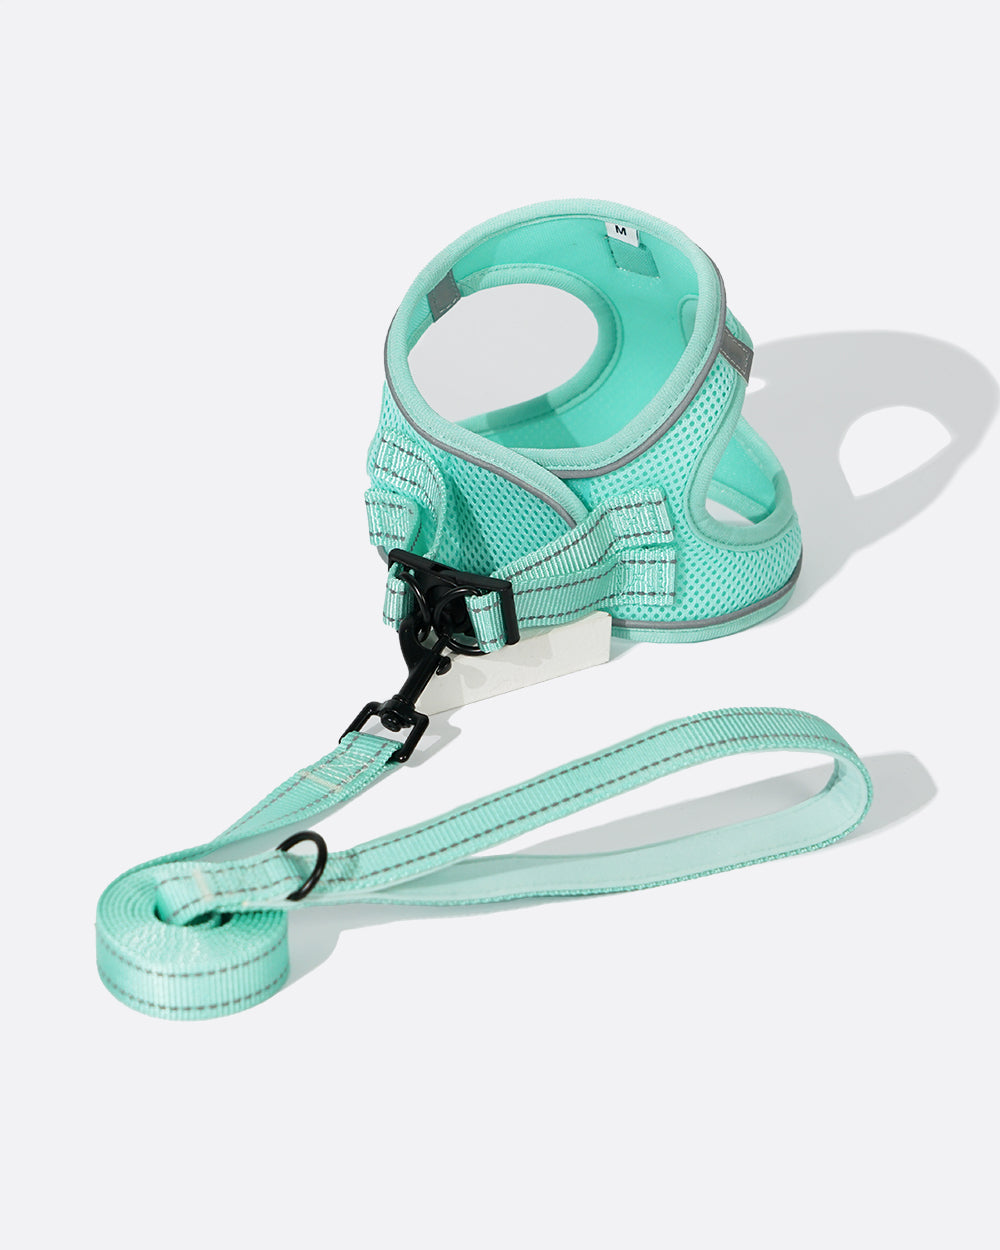 OxyMesh Velcro Step-in Harness and Leash Set - Mint Green